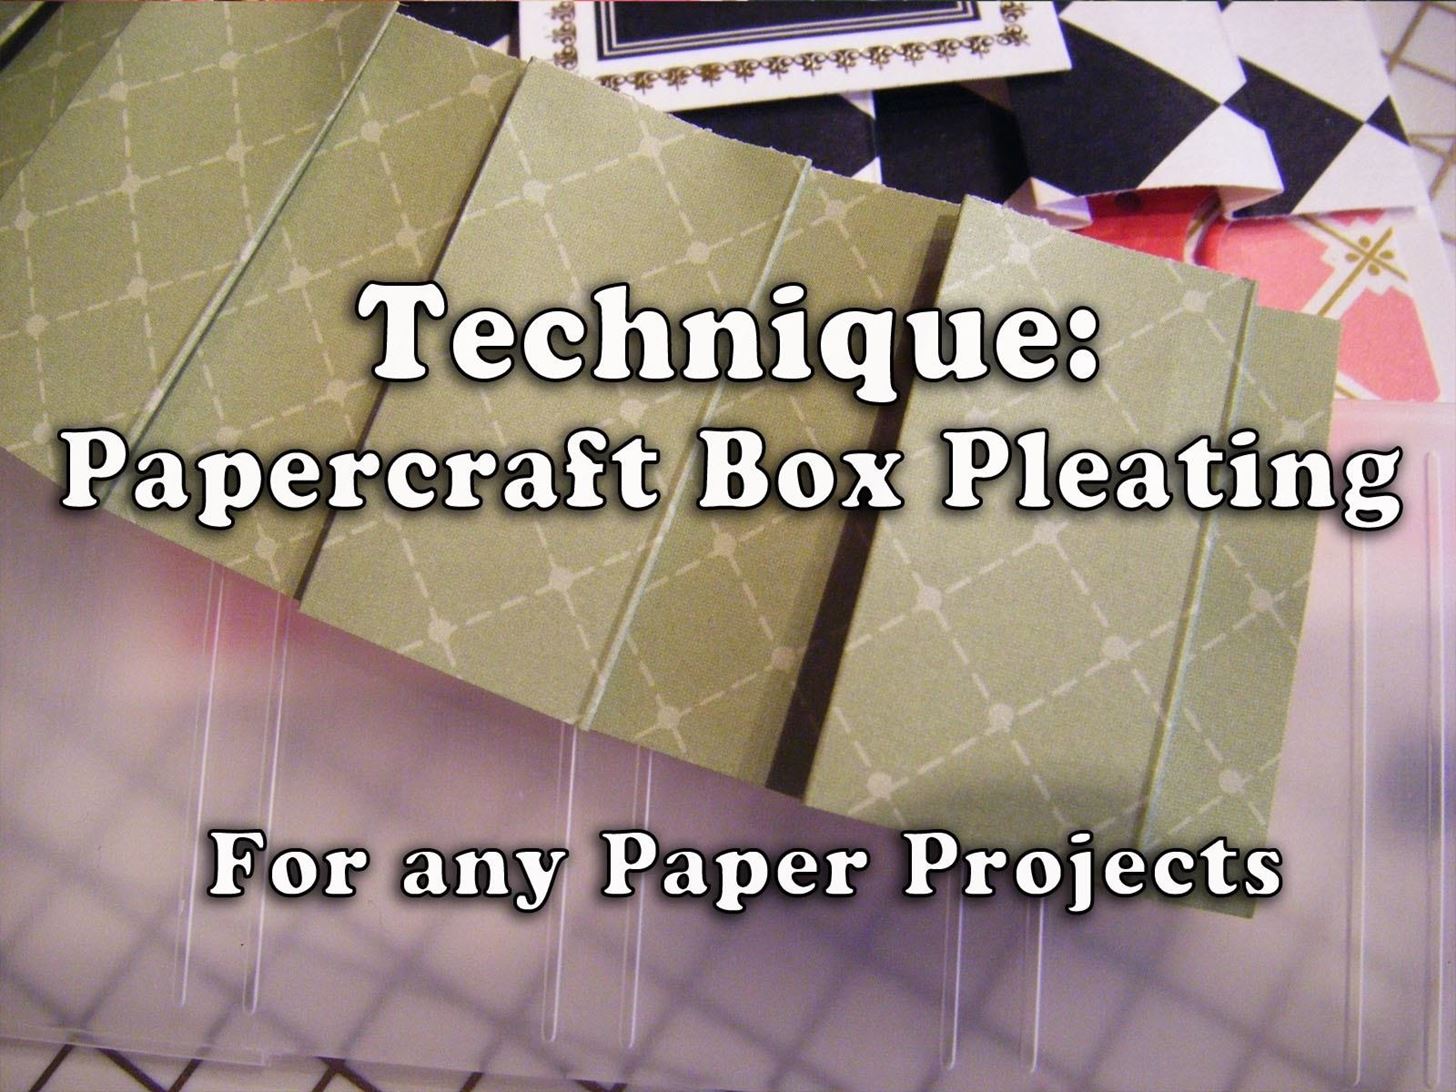 How to Make Papercraft Box Pleating